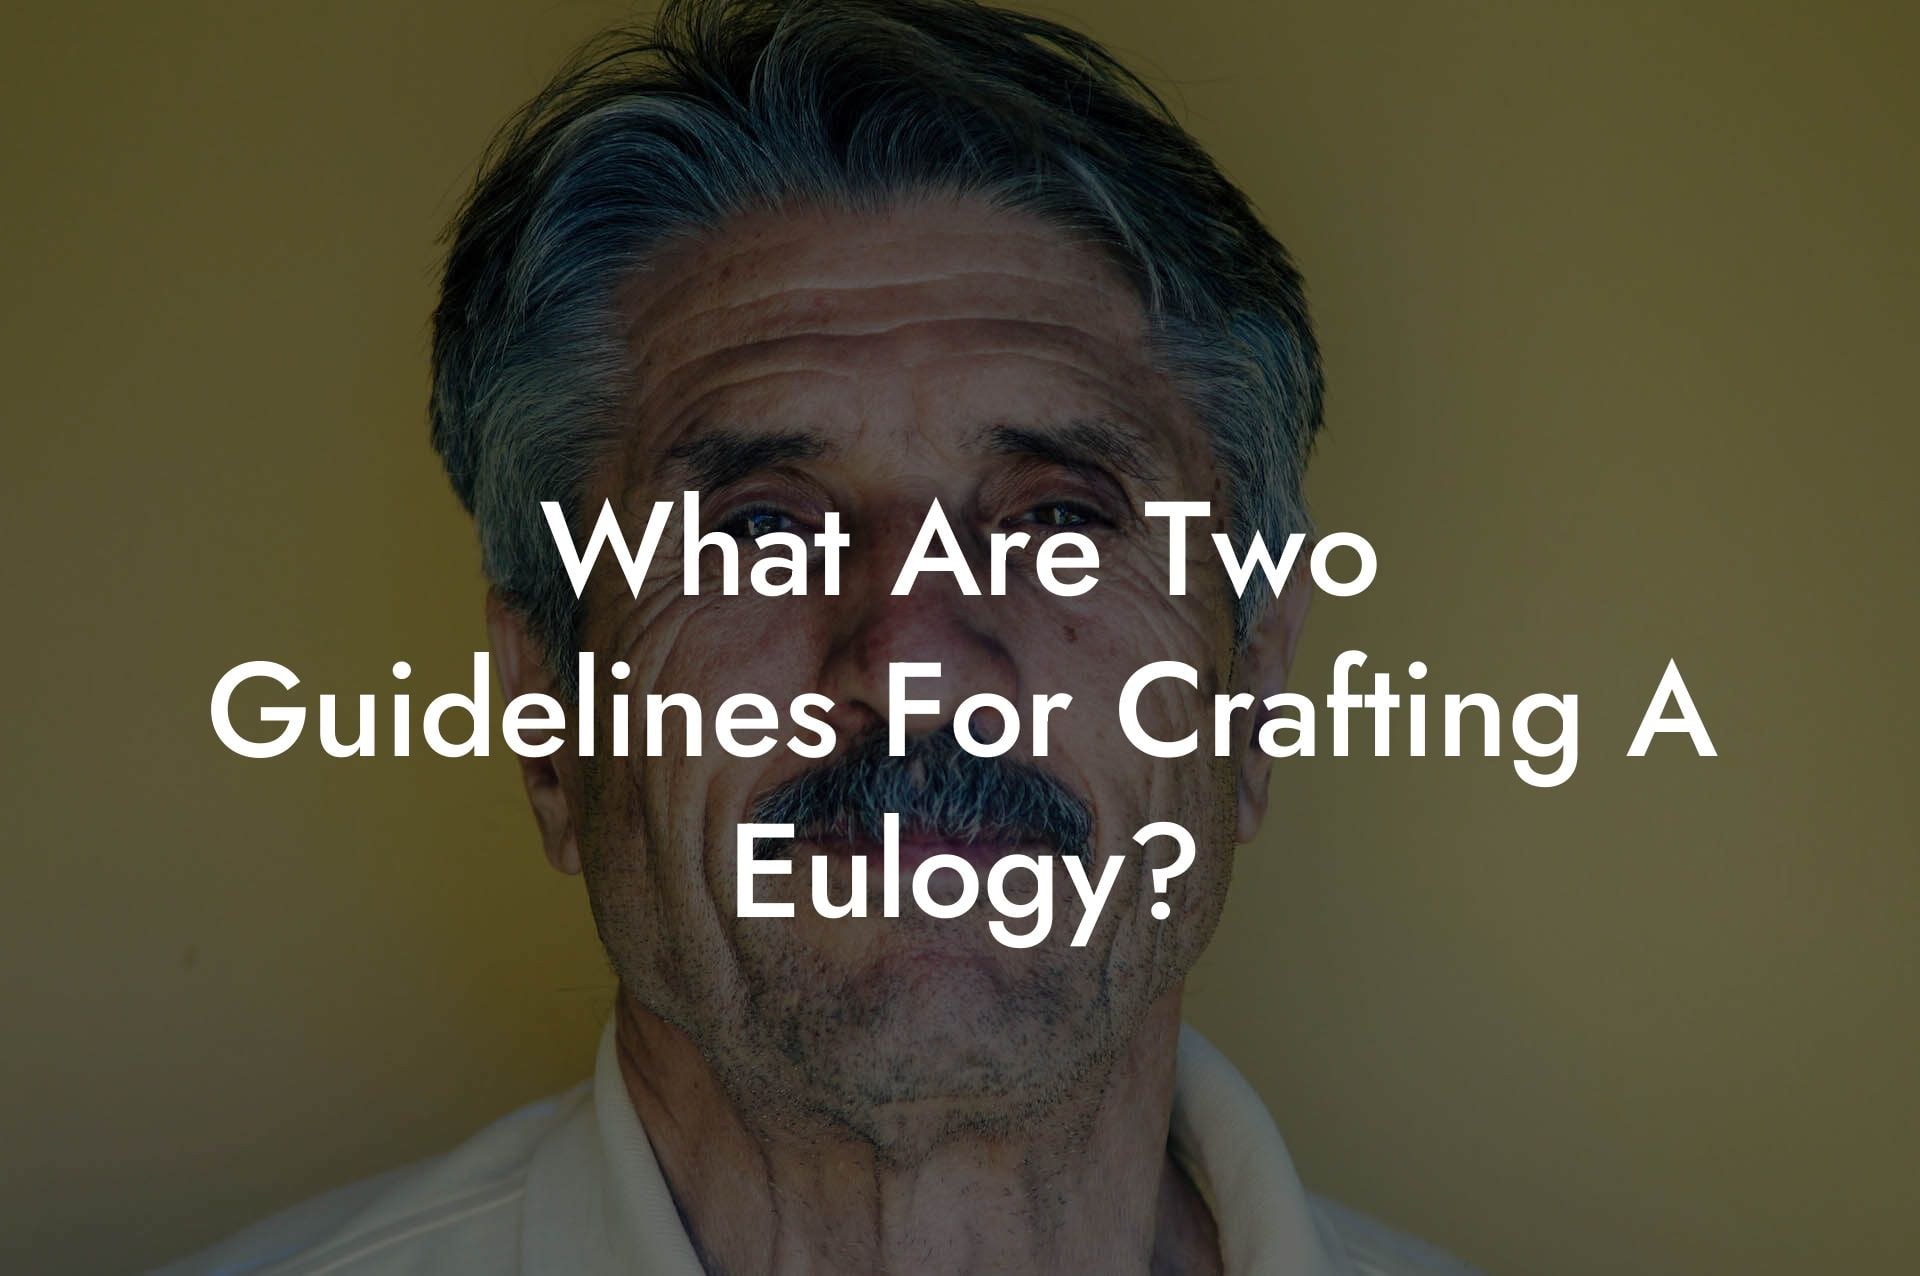 What Are Two Guidelines For Crafting A Eulogy?